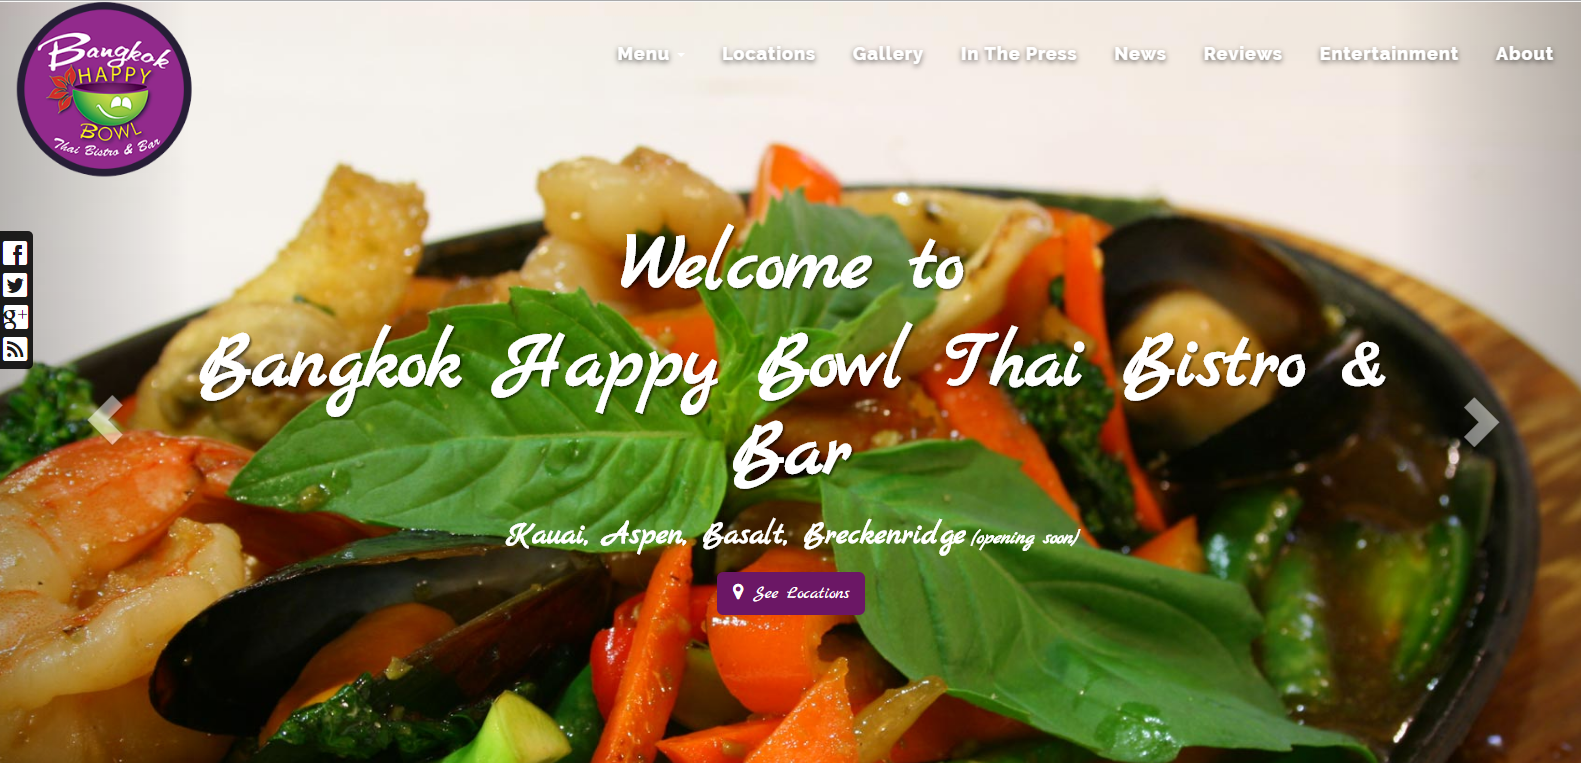 
New Website Launched: Bangkok Happy Bowl